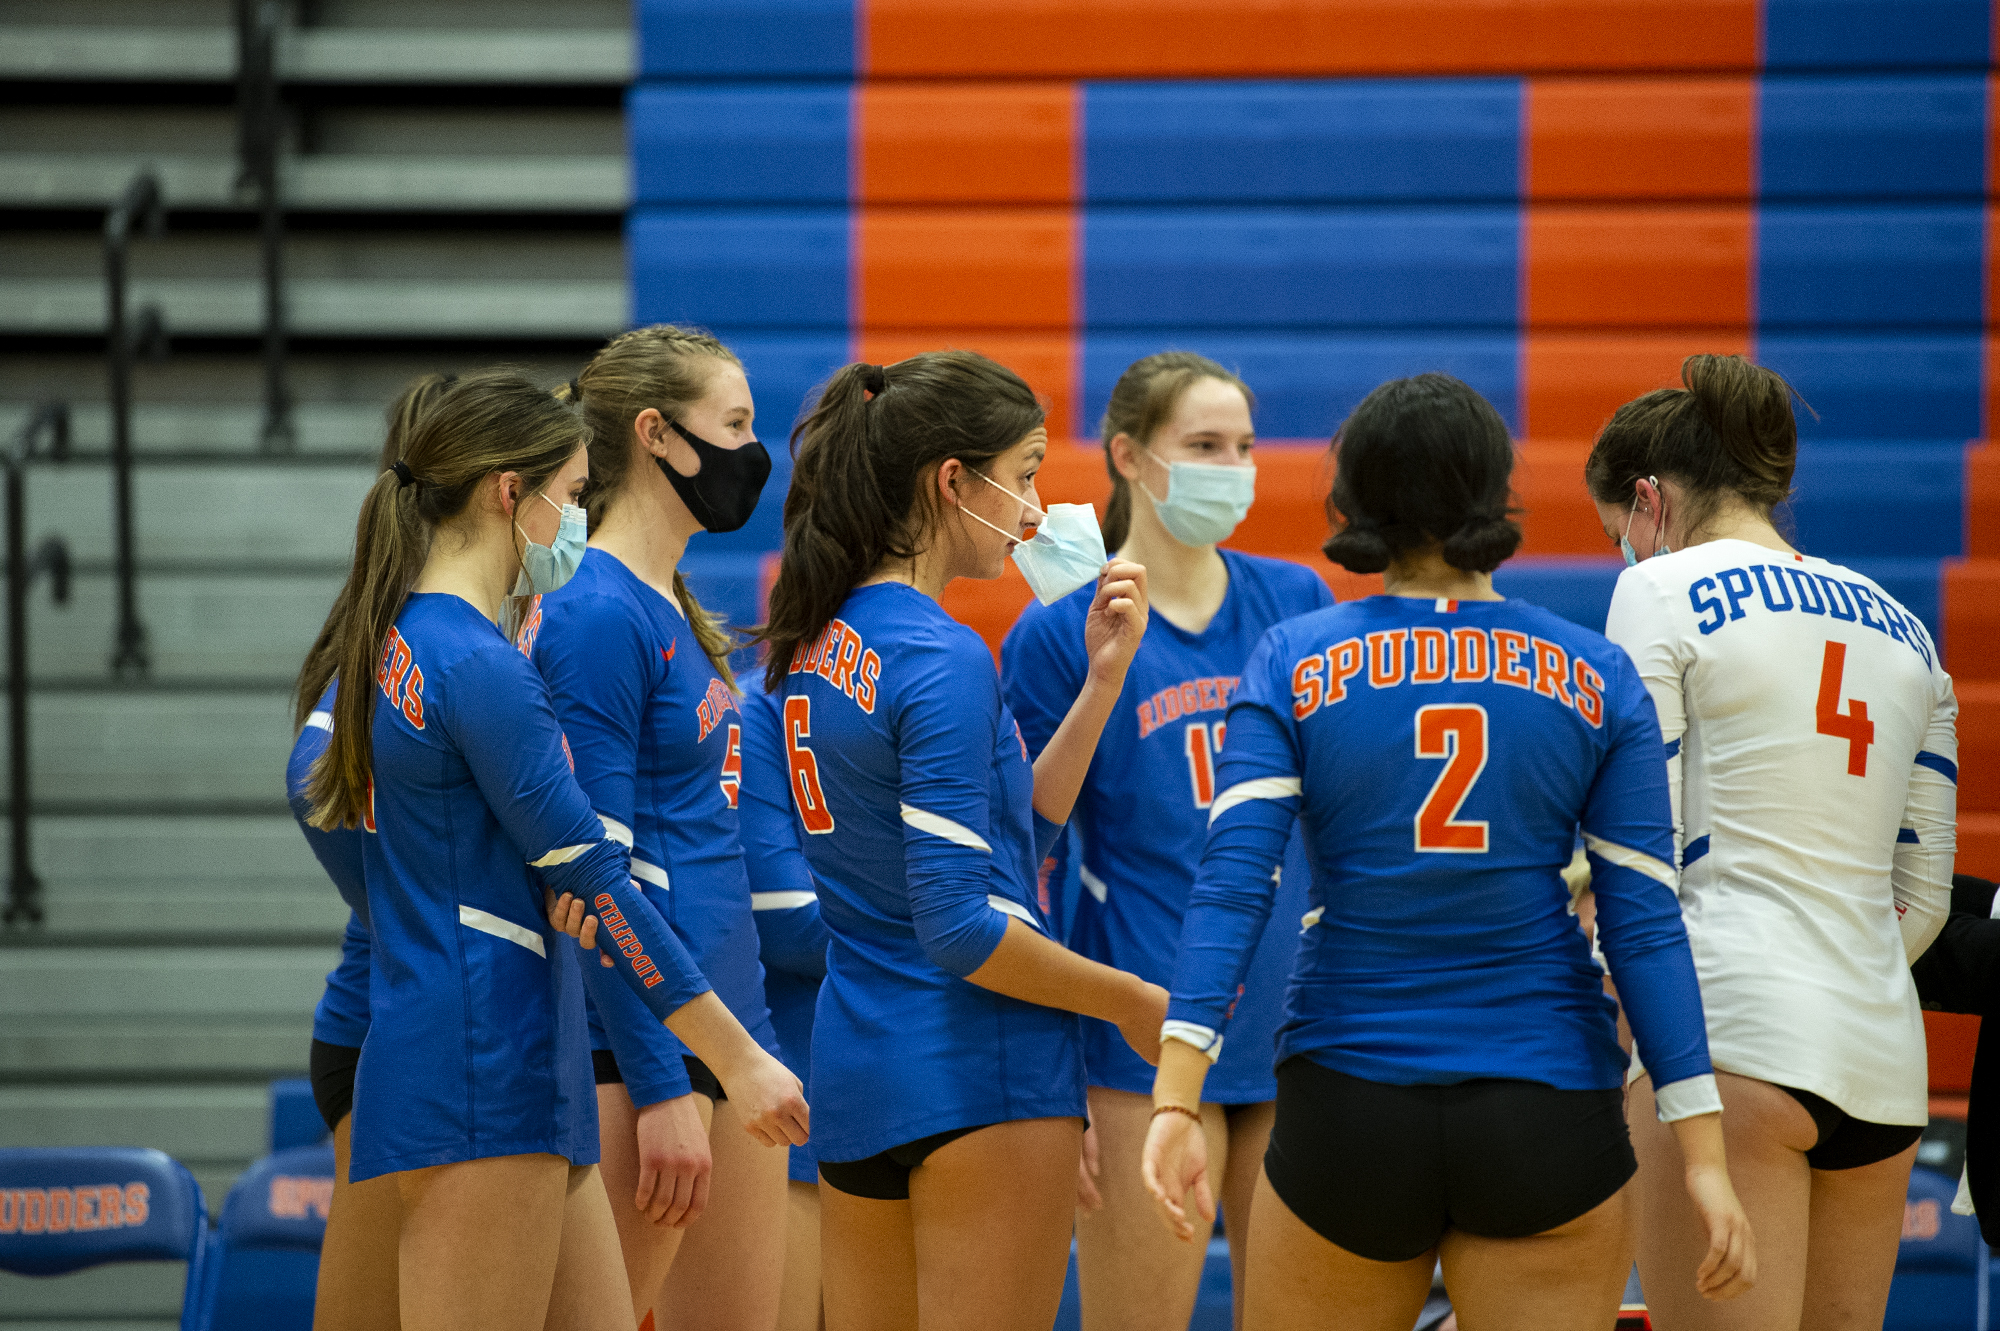 Ridgefield’s Presley McCaskill adjusts her mask during a timeout on Tuesday, February 16, 2021, at Ridgefield High School. Ridgefield won 25-20, 25-9, 25-12 over Mark Morris in its first volleyball match since winning the 2A State Championship in fall 2019.